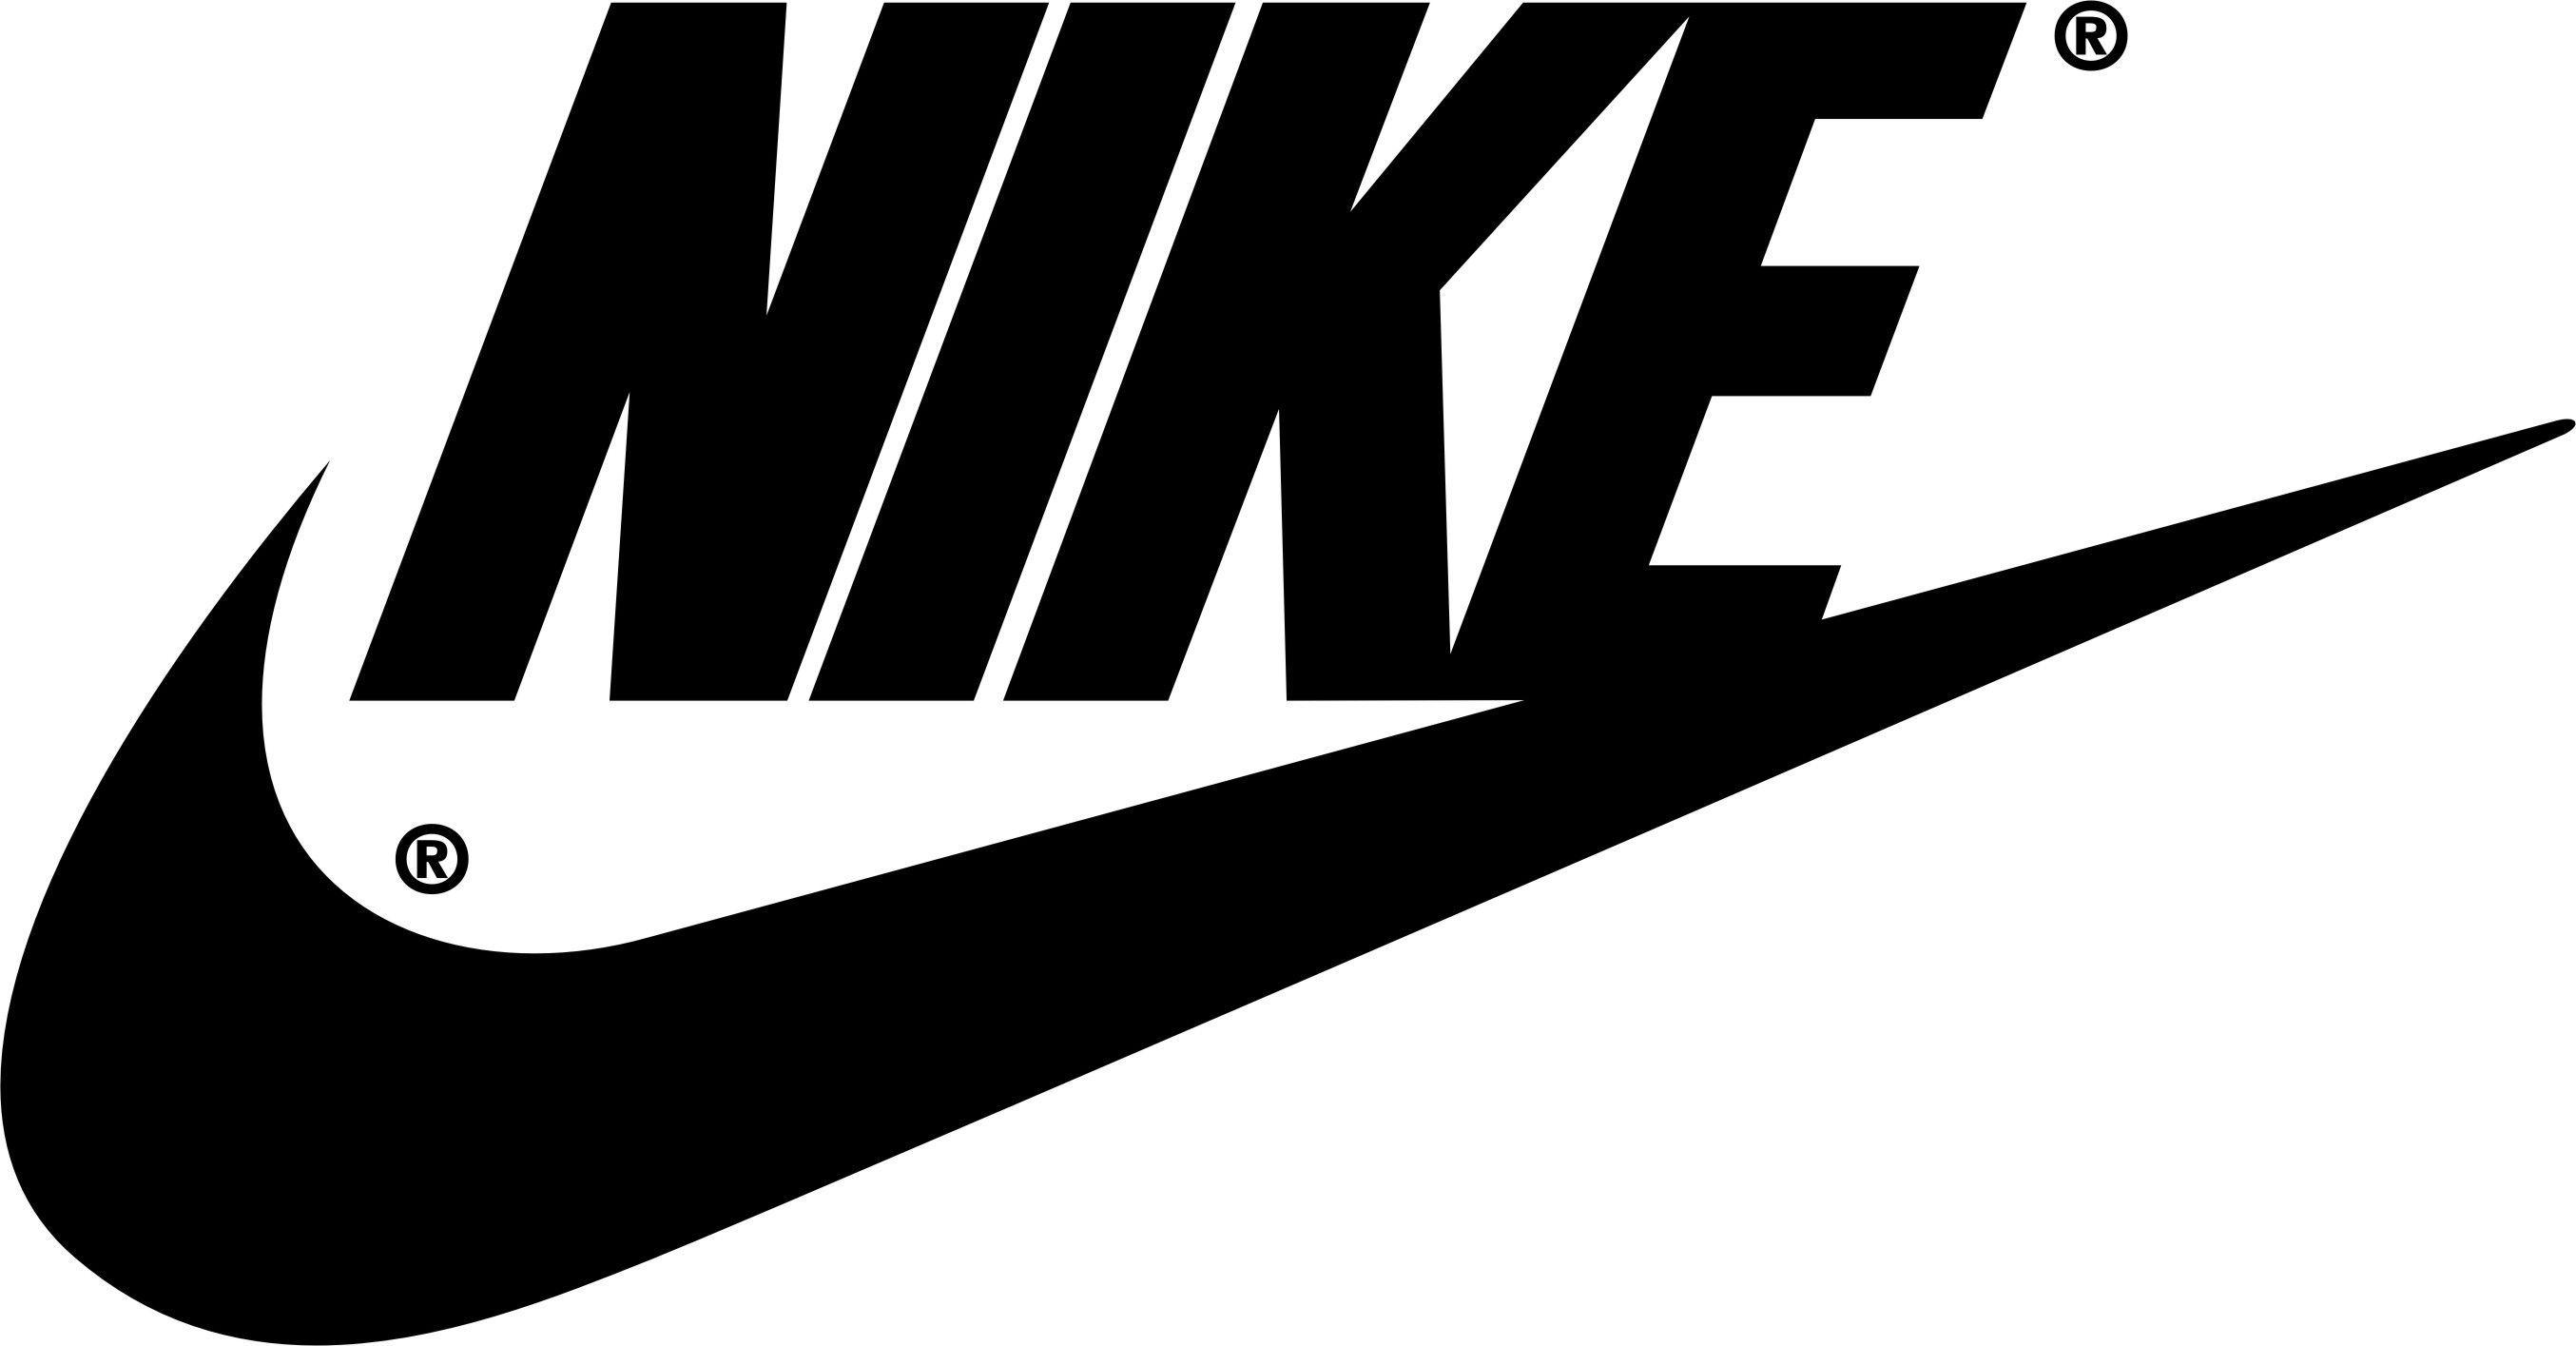 Most Popular Nike Logo - The 10 Most Expensive Logo Designs and Rebranding Most